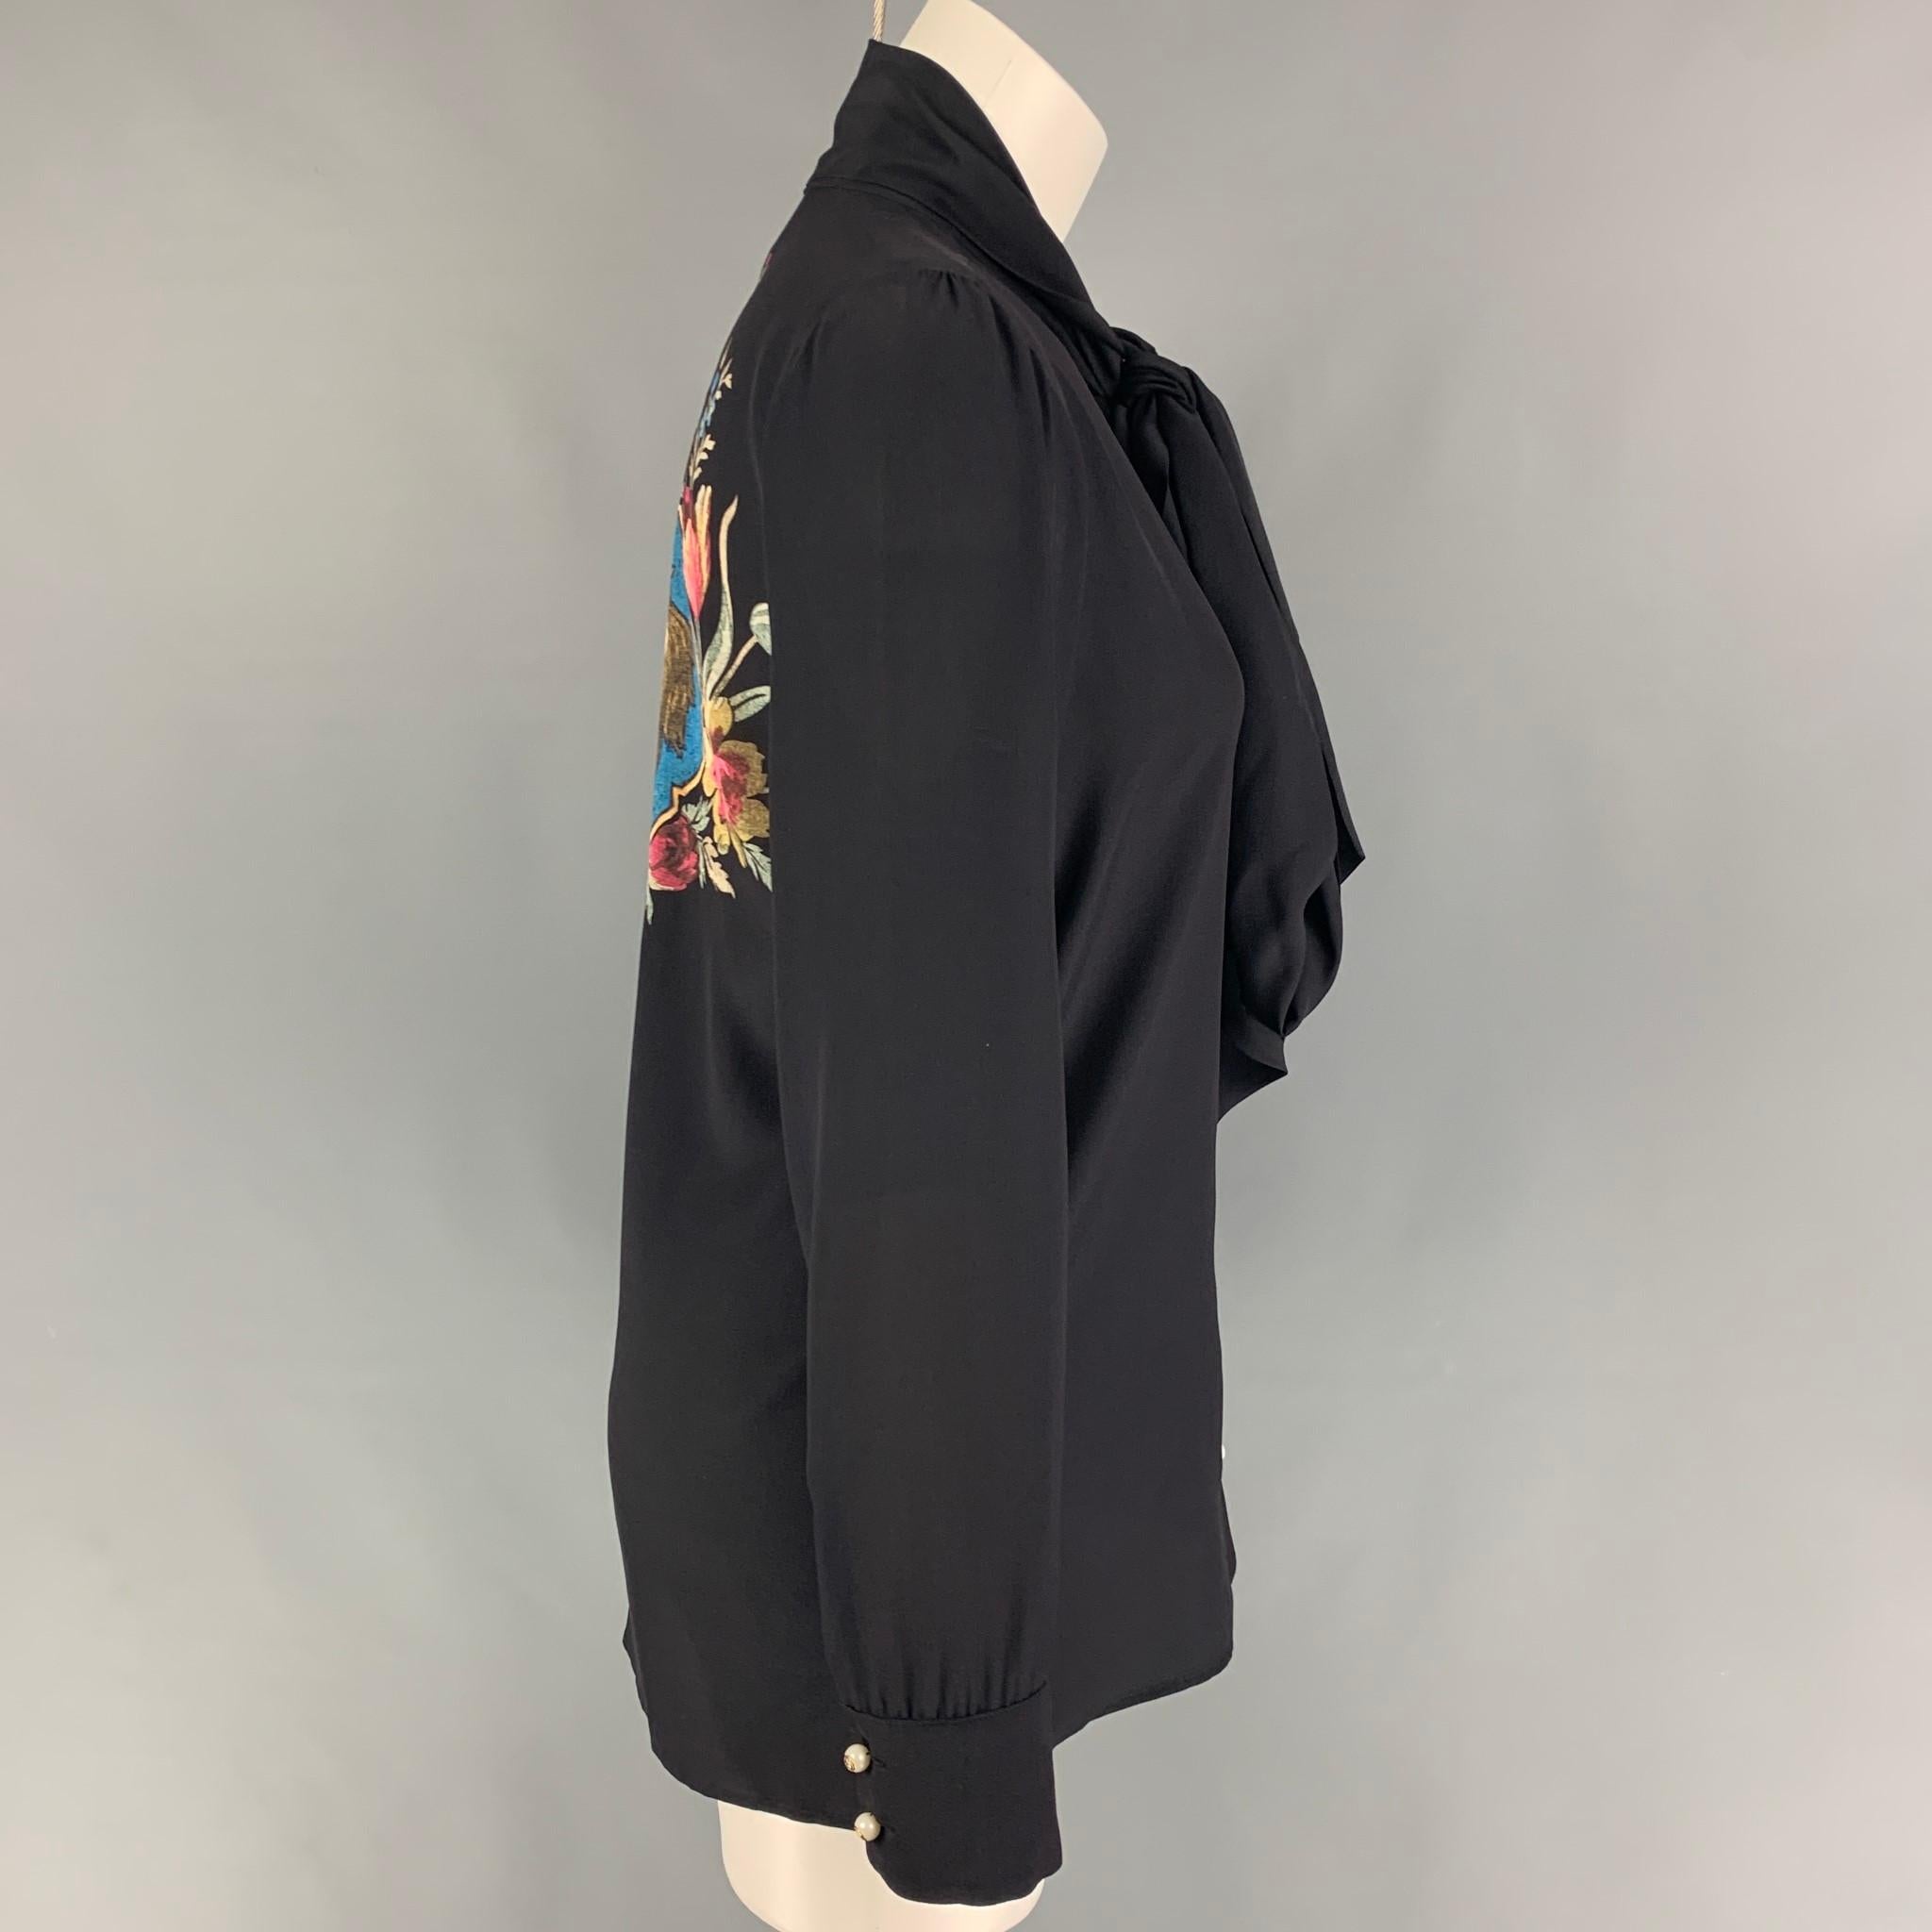 GUCCI blouse comes in a black silk featuring a front bow detail, back print design, and faux peal logo buttons. Made in Italy. 

Excellent Pre-Owned Condition.
Marked: 42

Measurements:

Shoulder: 14.5 in.
Bust: 38 in.
Sleeve: 24.5 in.
Length: 28